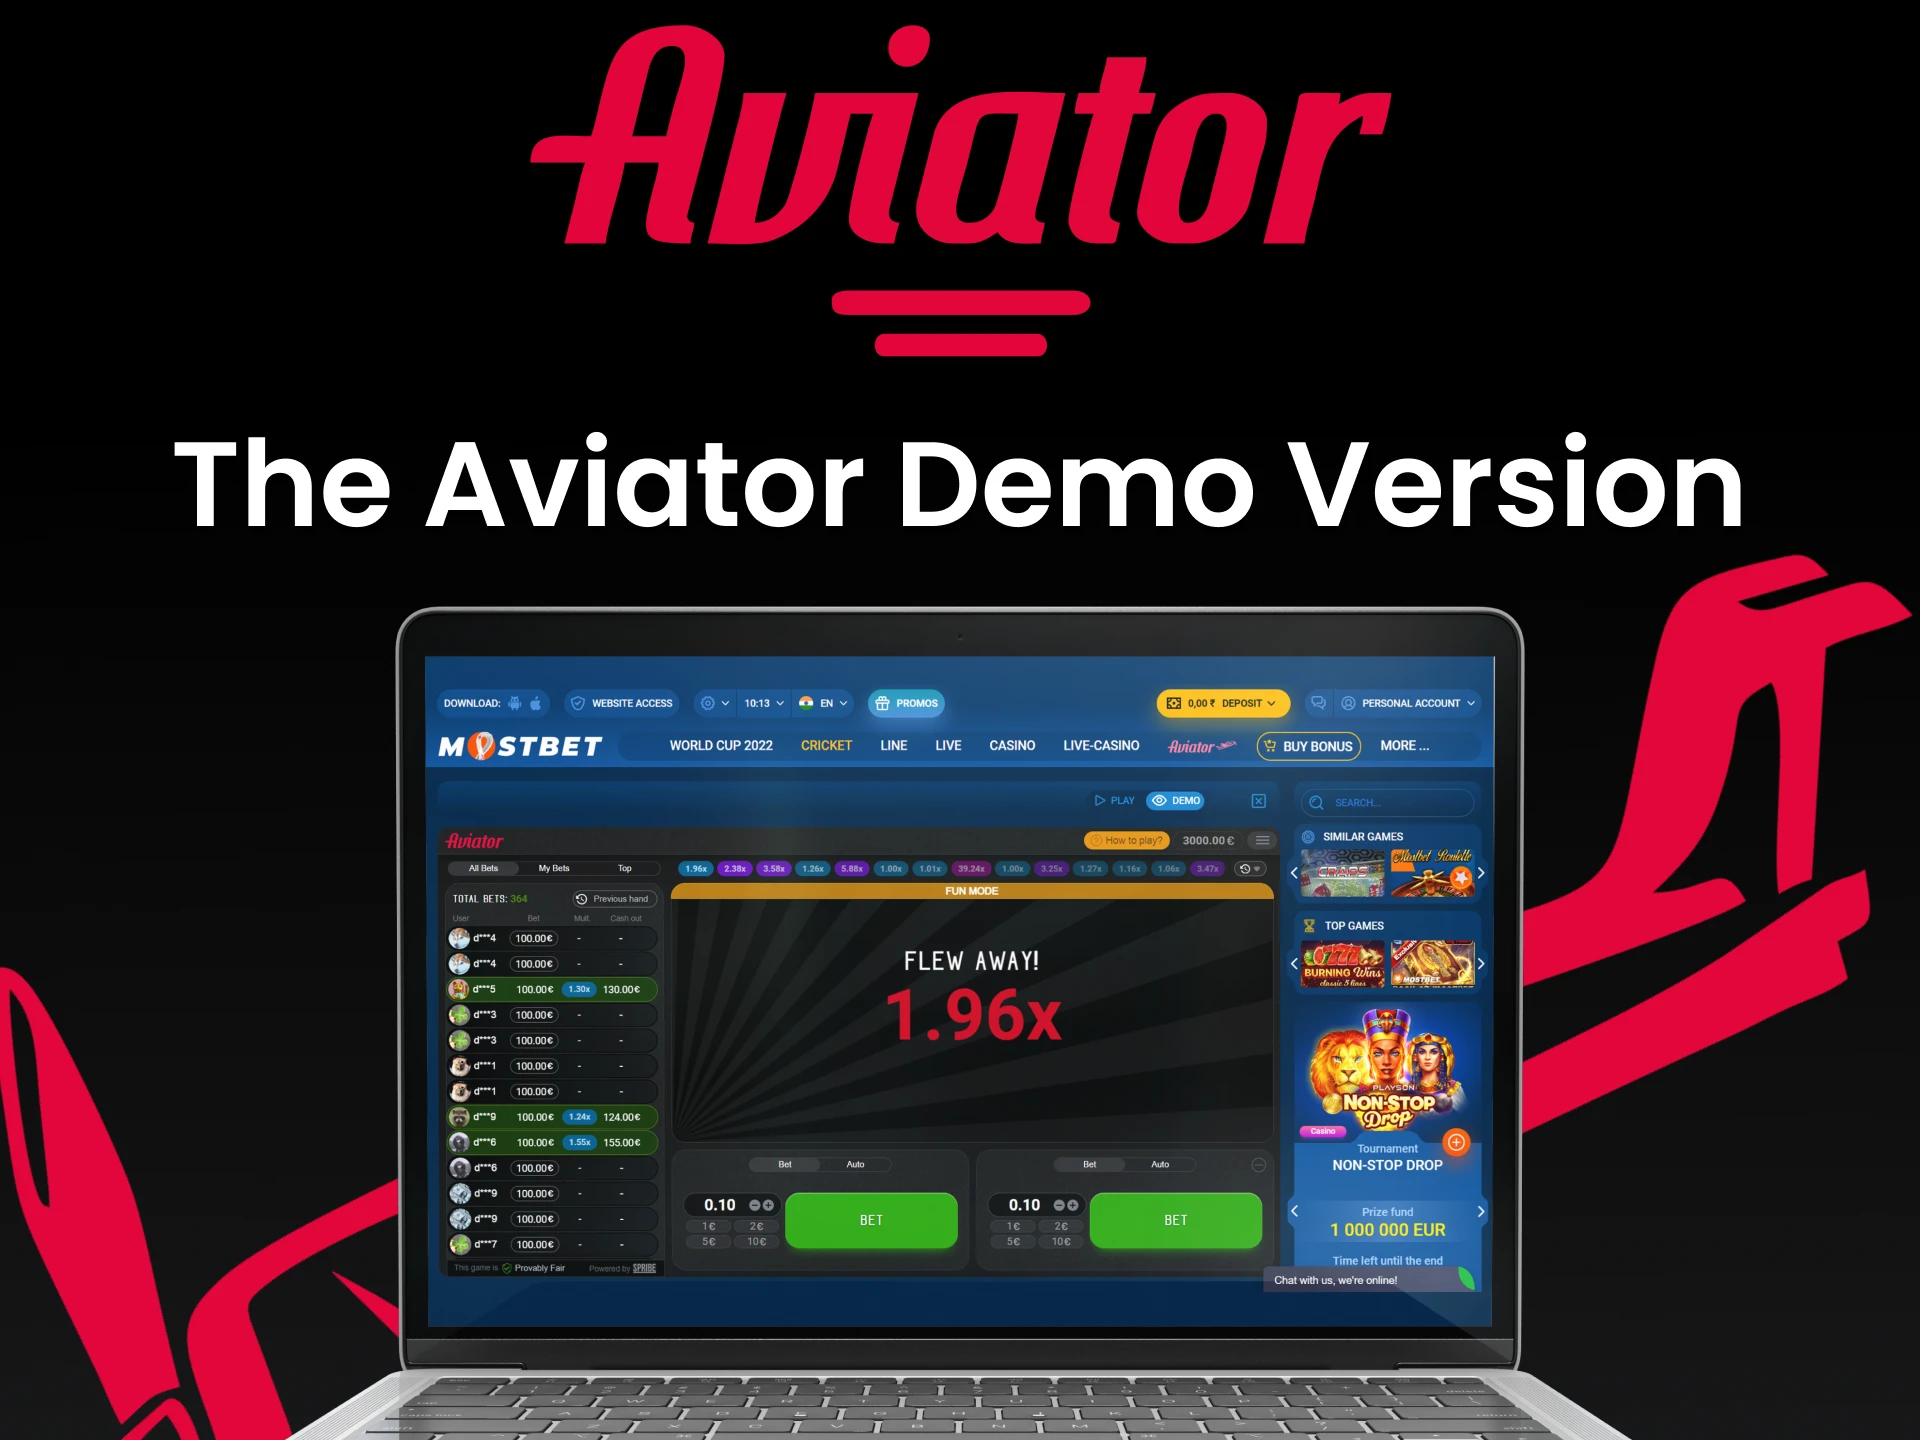 To start winning and earning money, you can practice in the demo version of the Aviator game.